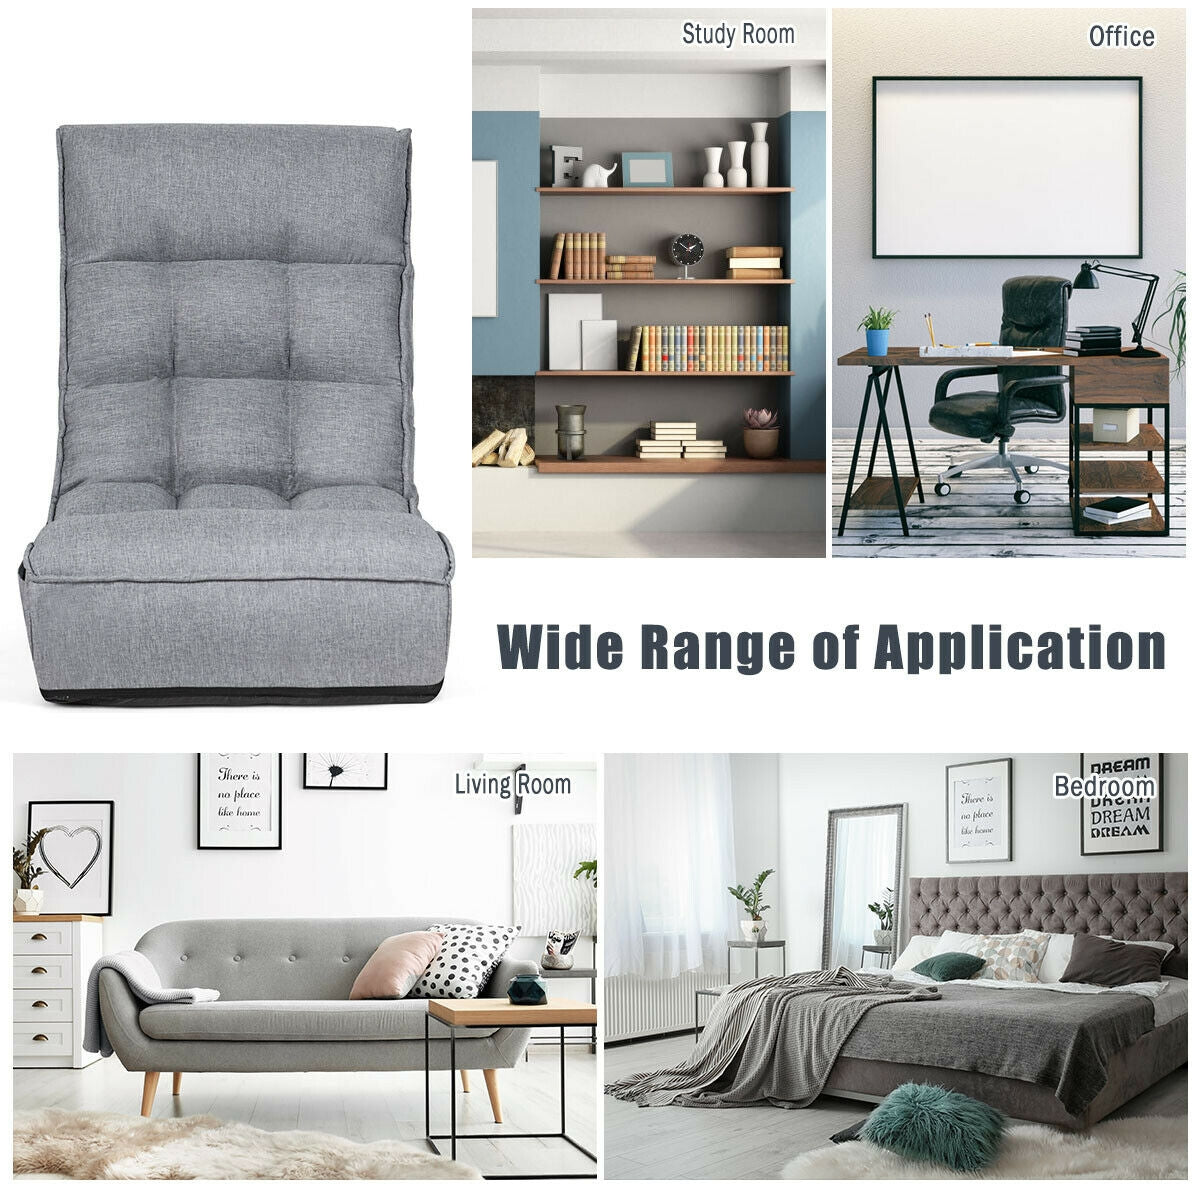 Chic and Functional: Elevate your home decor with a modern and chic floor gaming sofa, complete with a side pocket for convenient storage, perfect for any room including the living room, bedroom, or balcony.